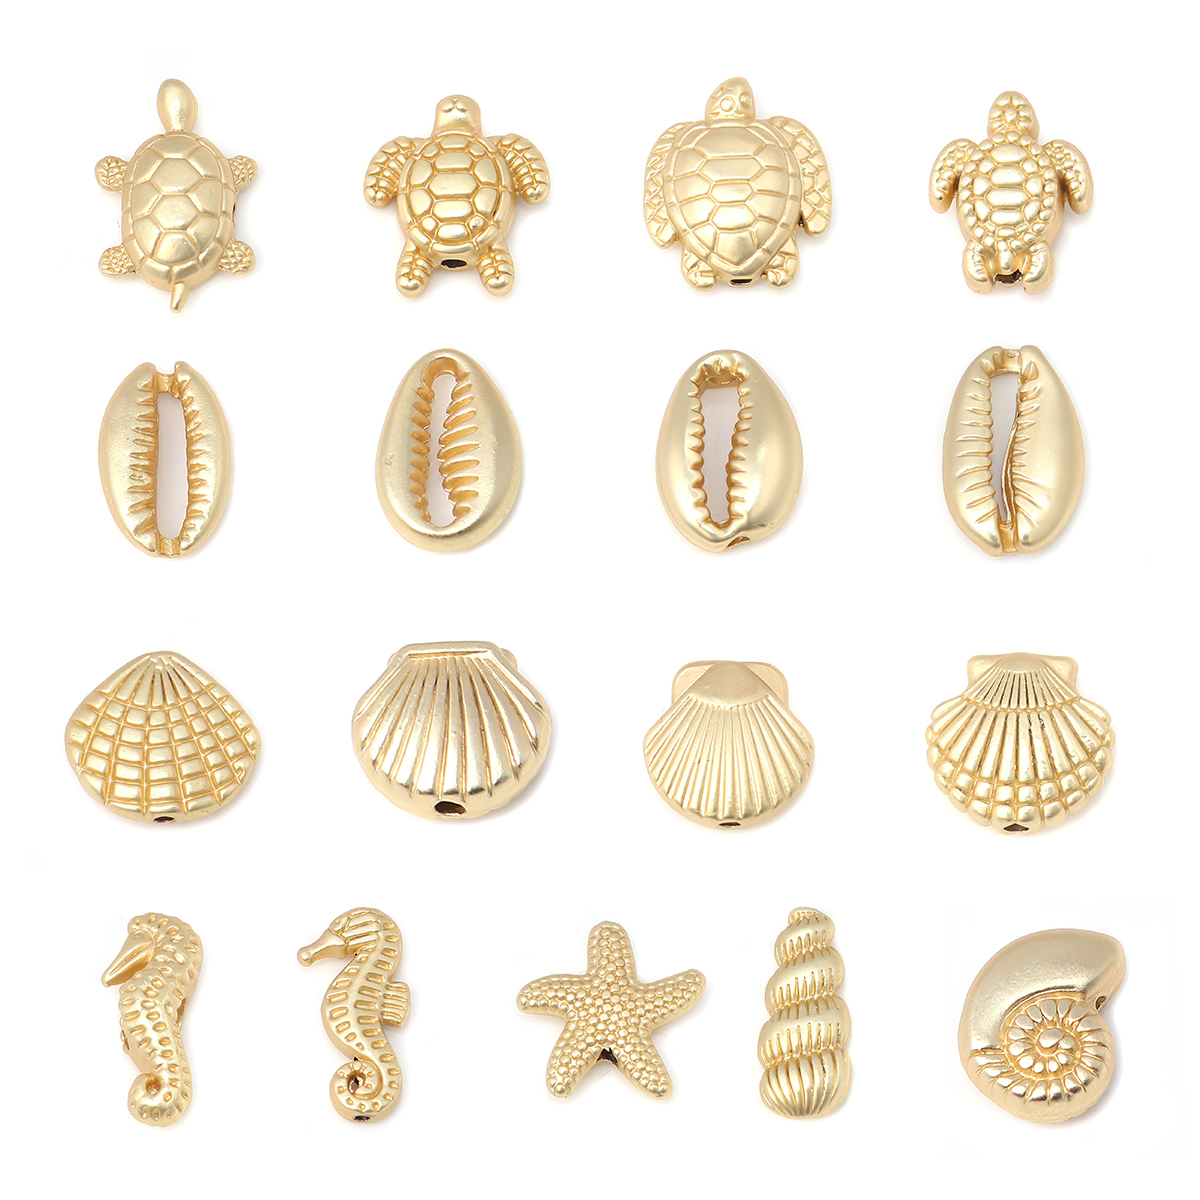 Picture of Zinc Based Alloy Ocean Jewelry Beads Sea Turtle Animal Matt Real Gold Plated 9mm x 7mm, Hole: Approx 0.9mm, 10 PCs